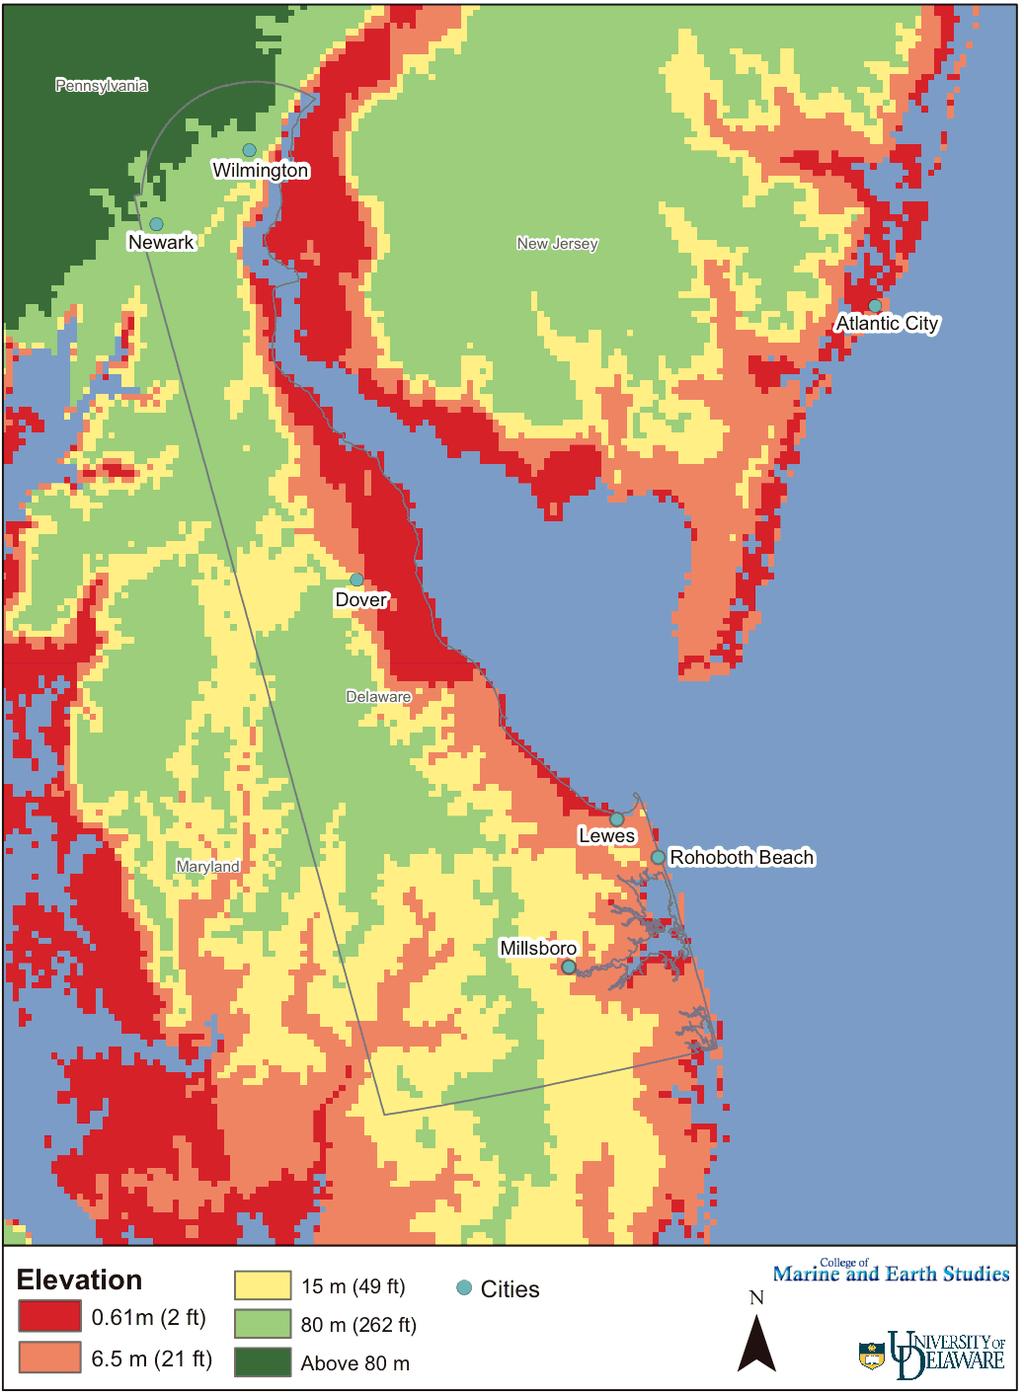 Figure 3.1 Low lying Delaware and environs impacted by sea level rise Table 3.